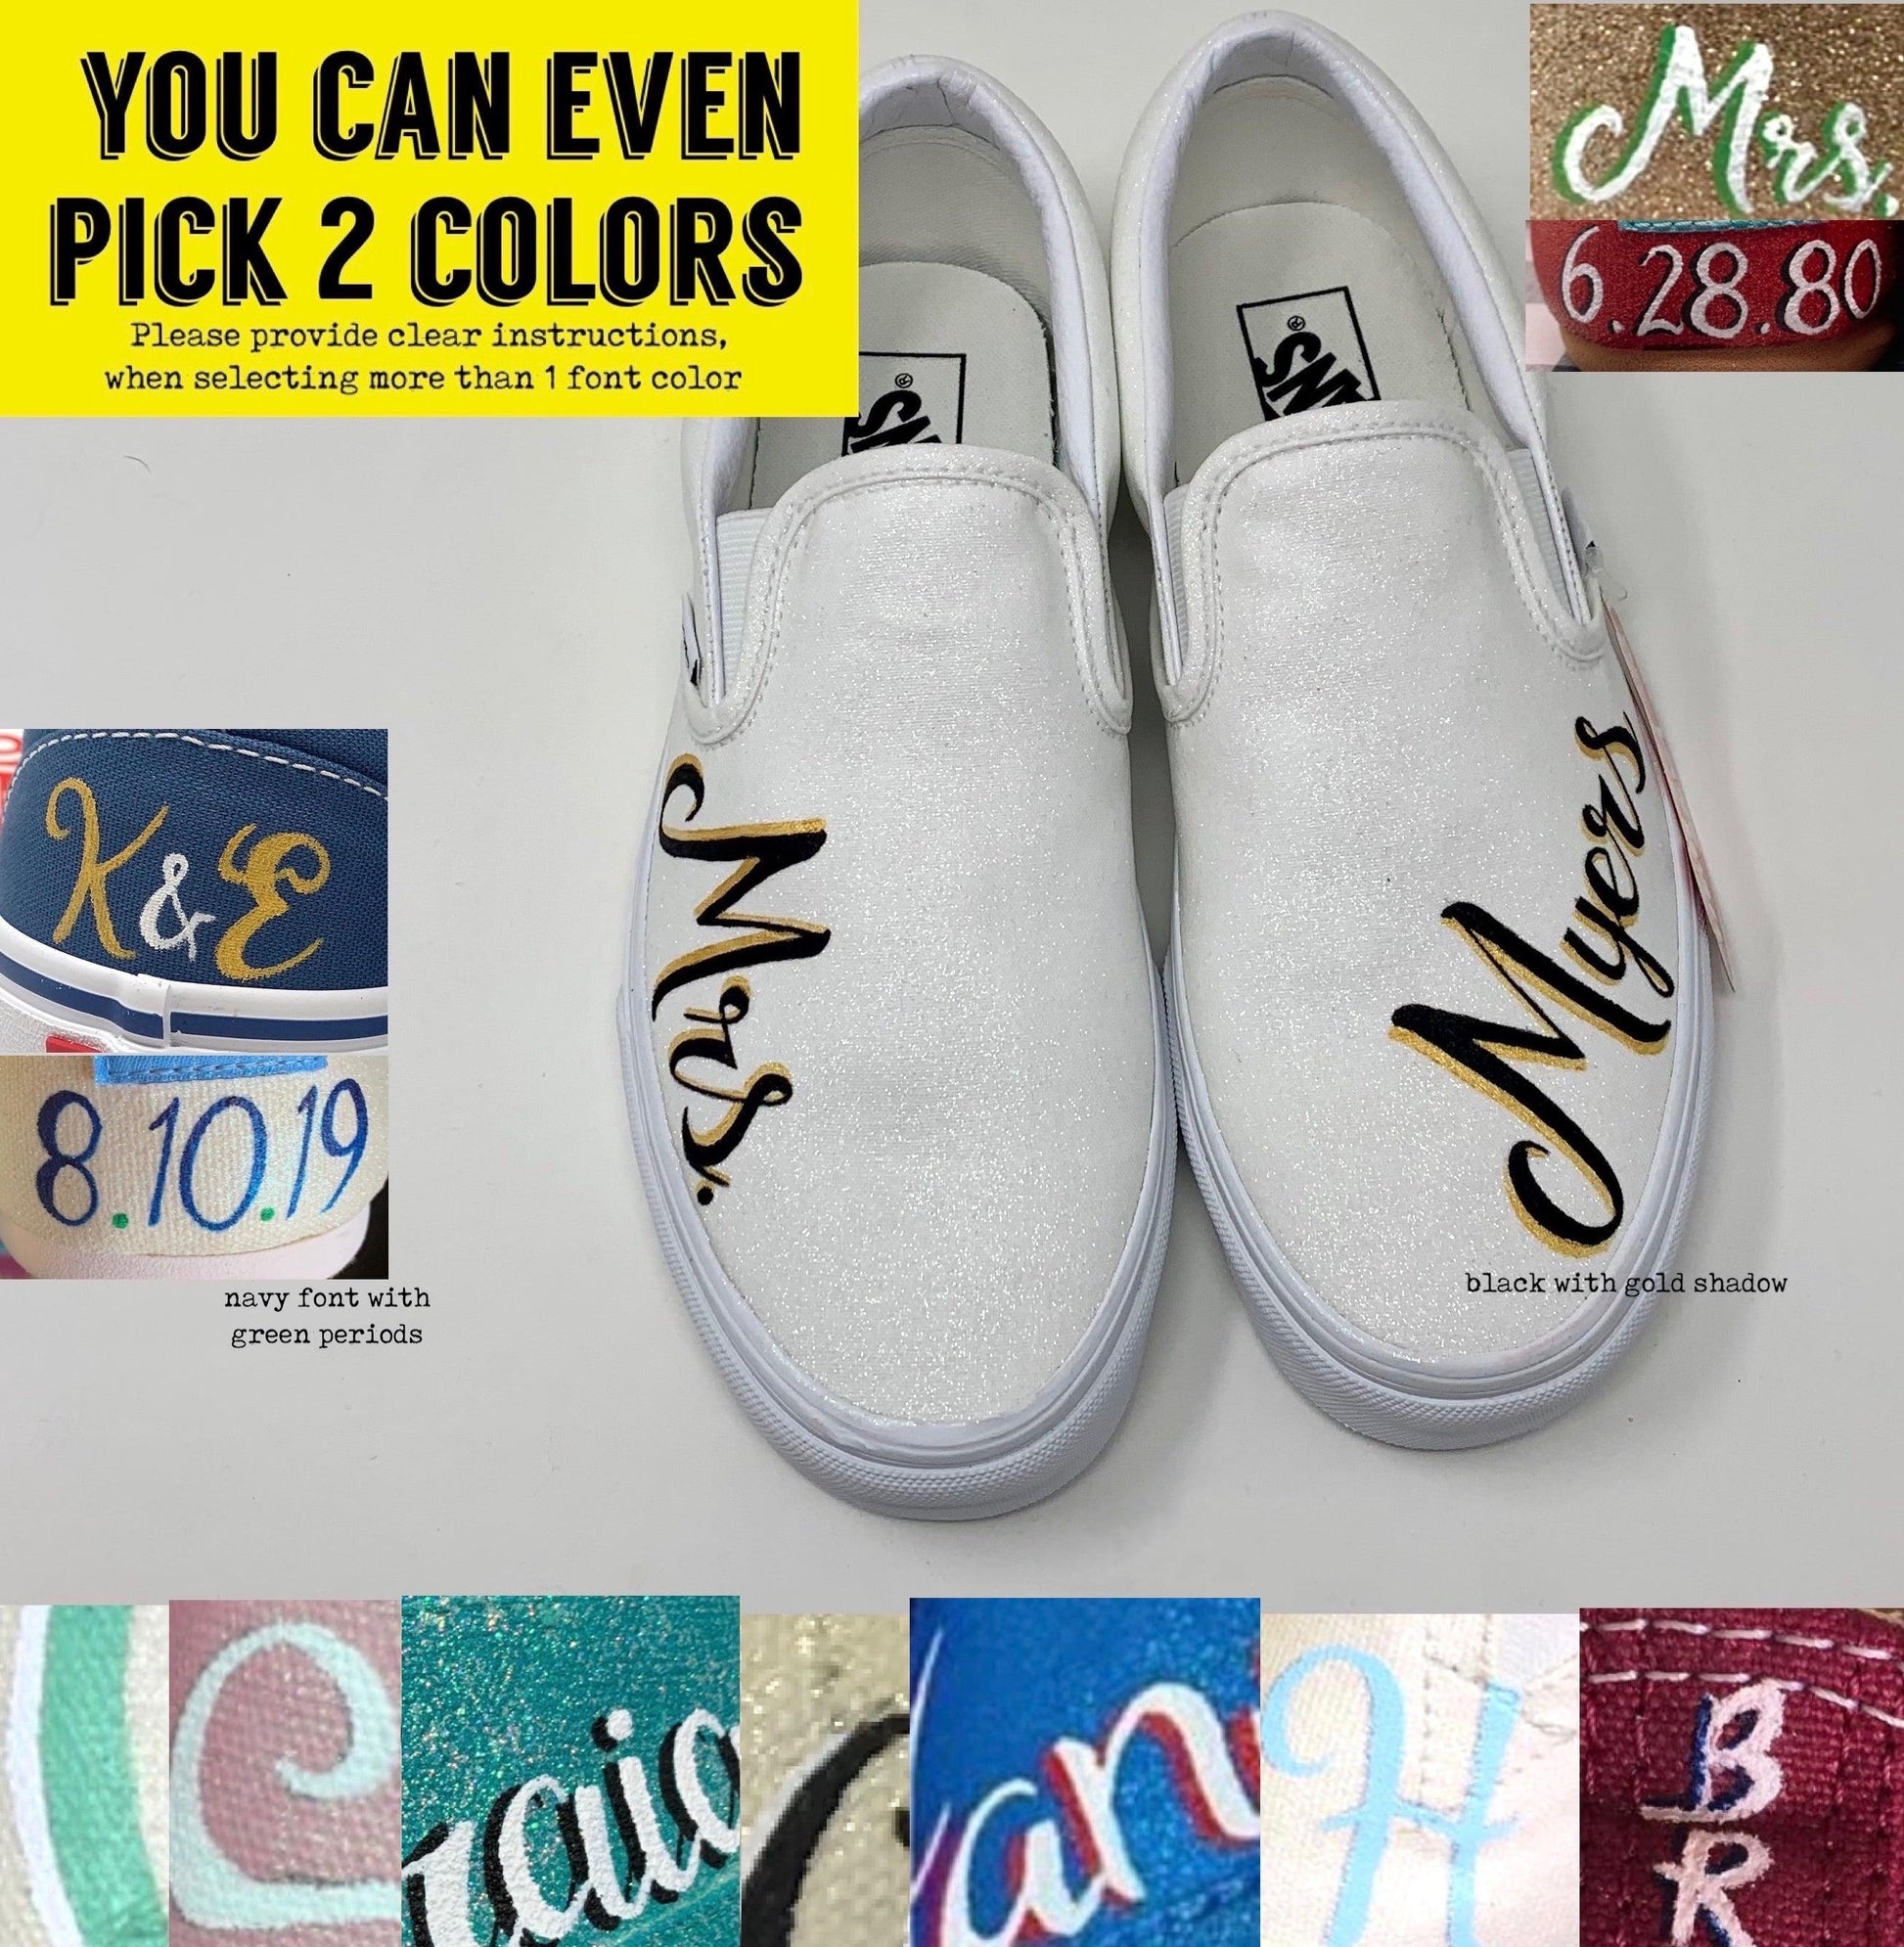 reference for different font colors to have painted on wedding shoes by ButterMakesMeHappy